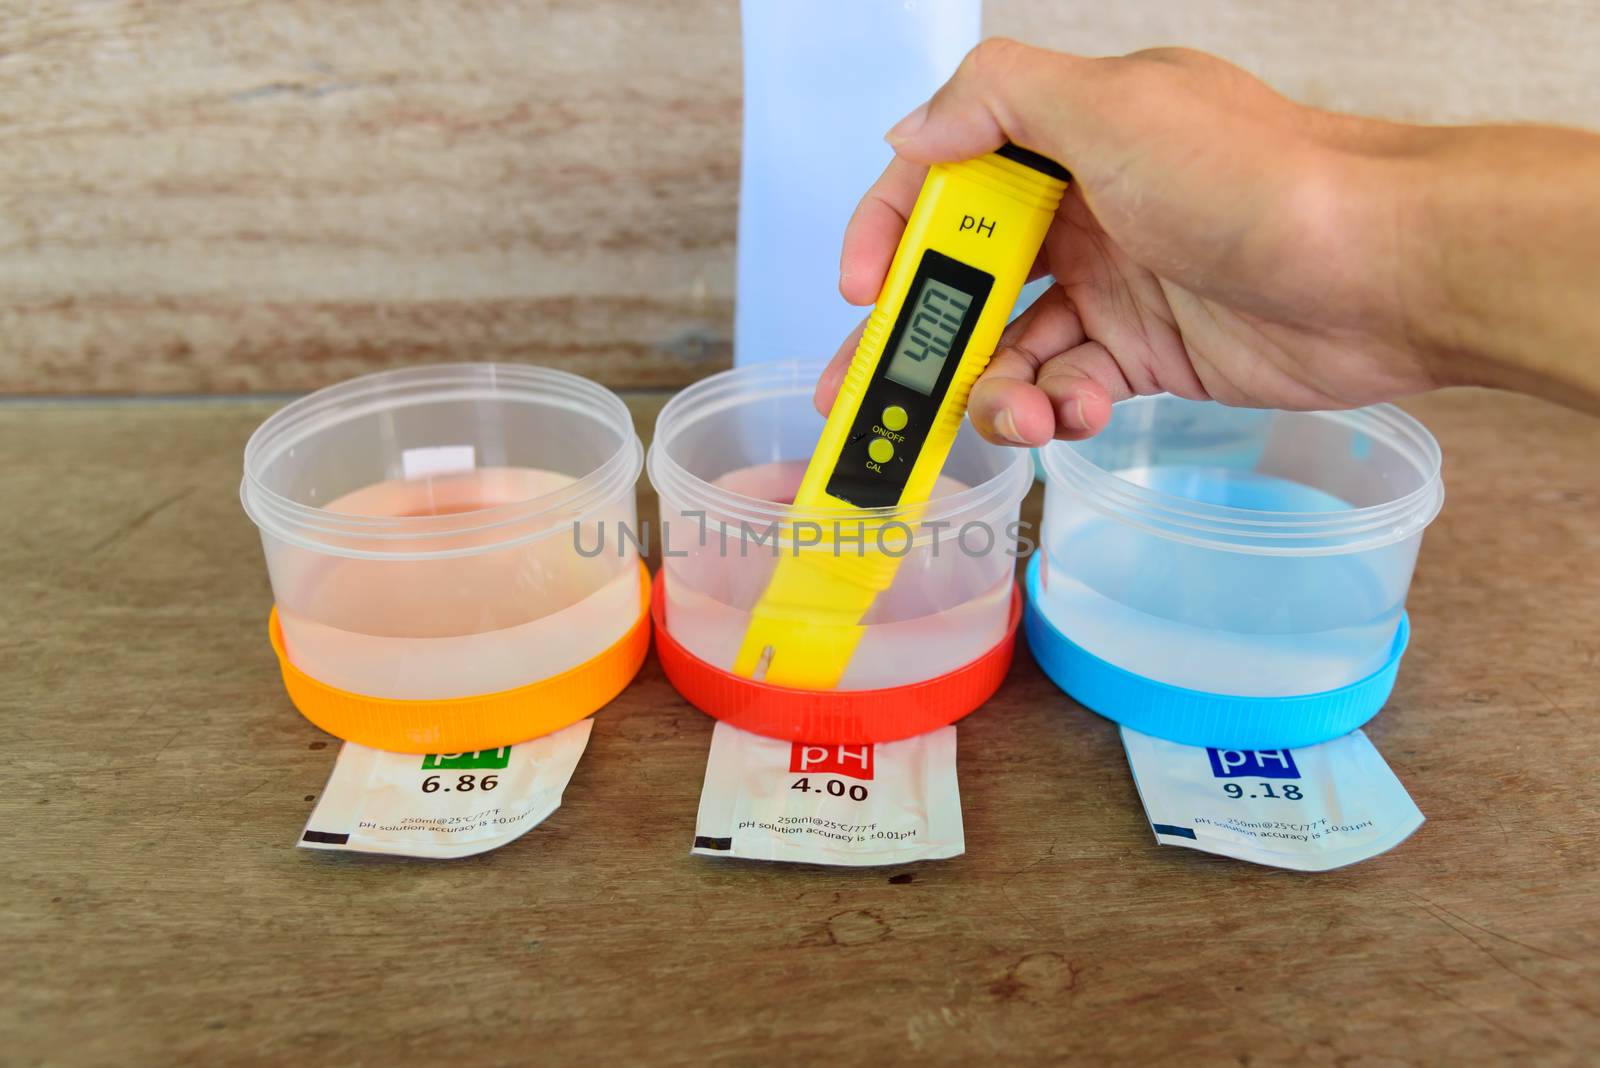 The man calibrate Ph meter before use it for tester by rukawajung